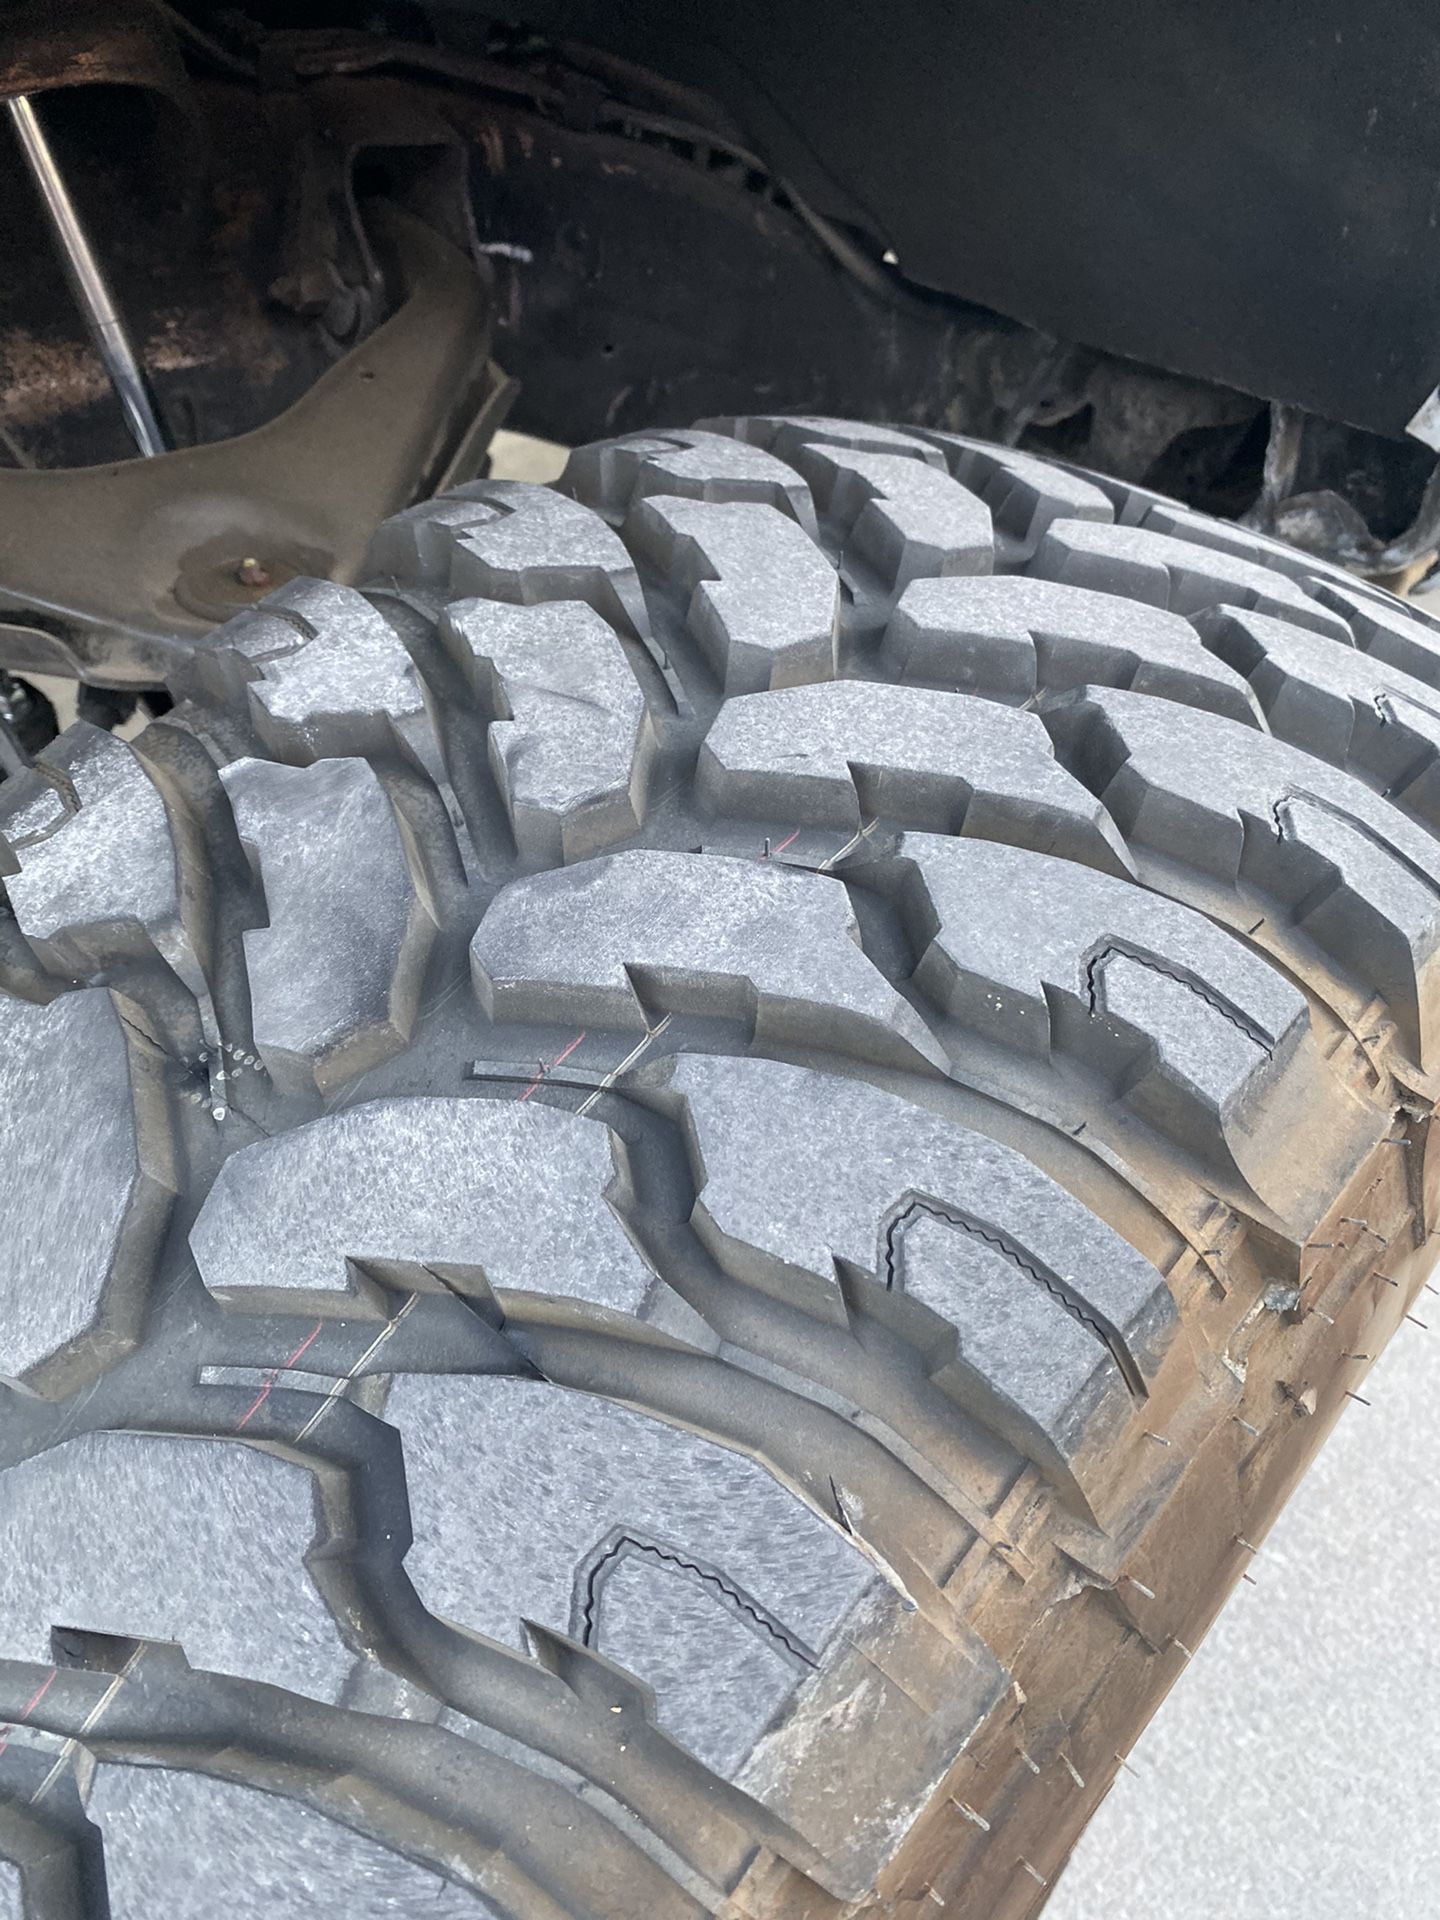 *****Tires only********** Mud tires 37/13.5/20